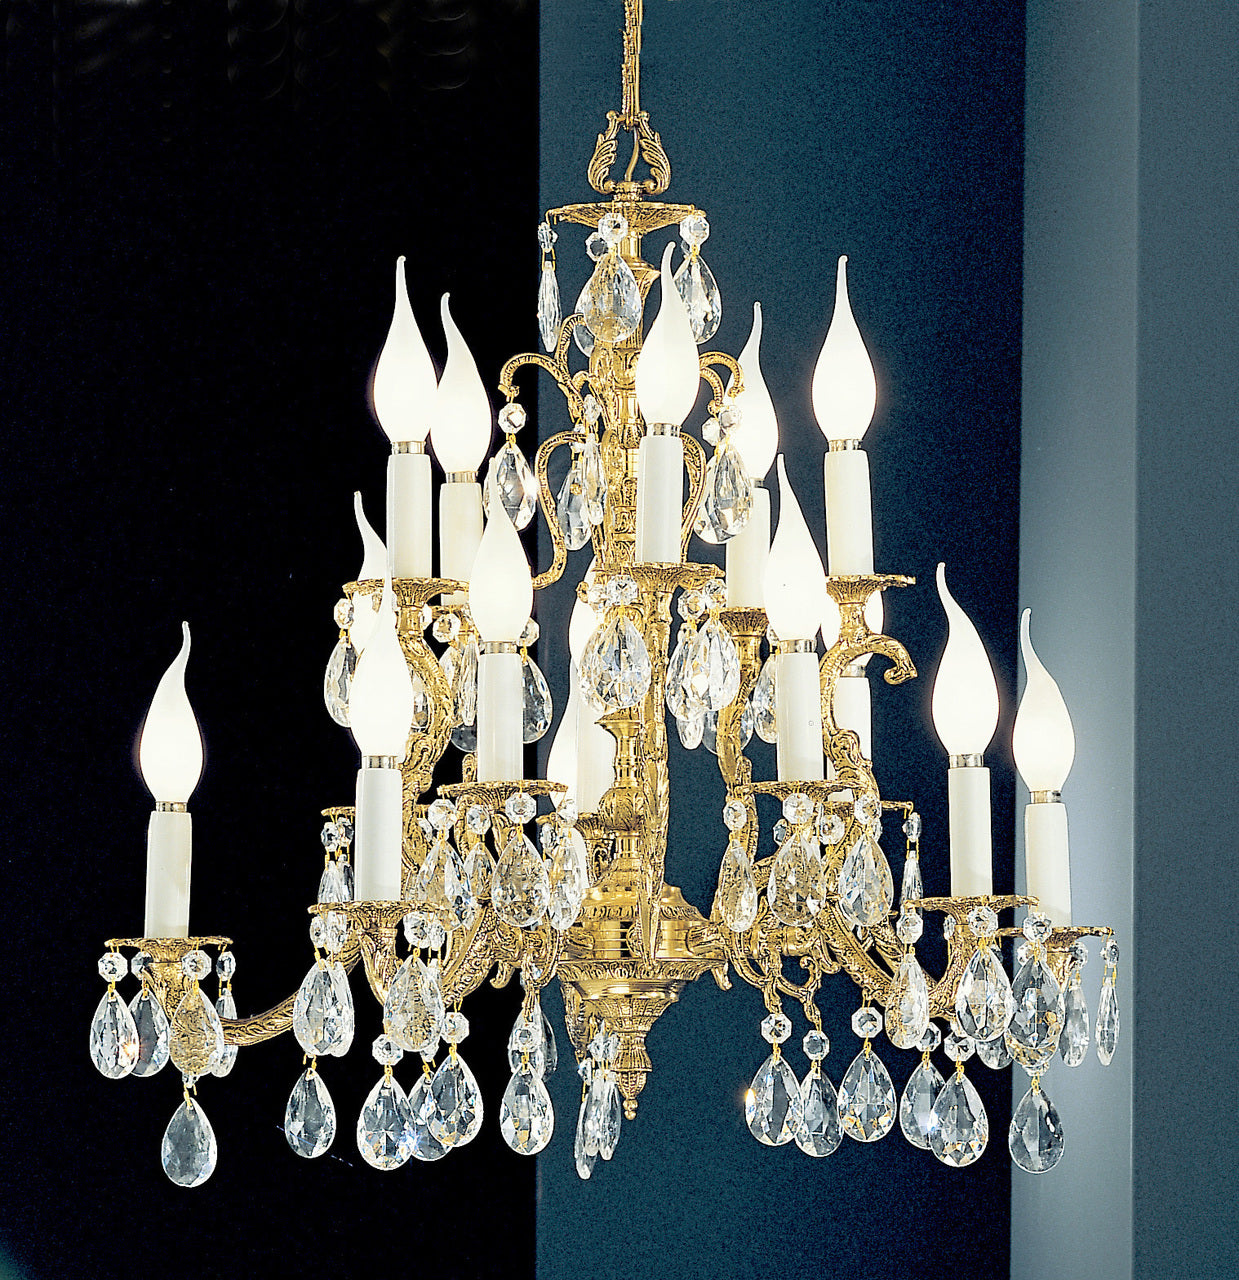 Classic Lighting 5515 MS C Barcelona Crystal/Cast Brass Chandelier in Millennium Silver (Imported from Spain)